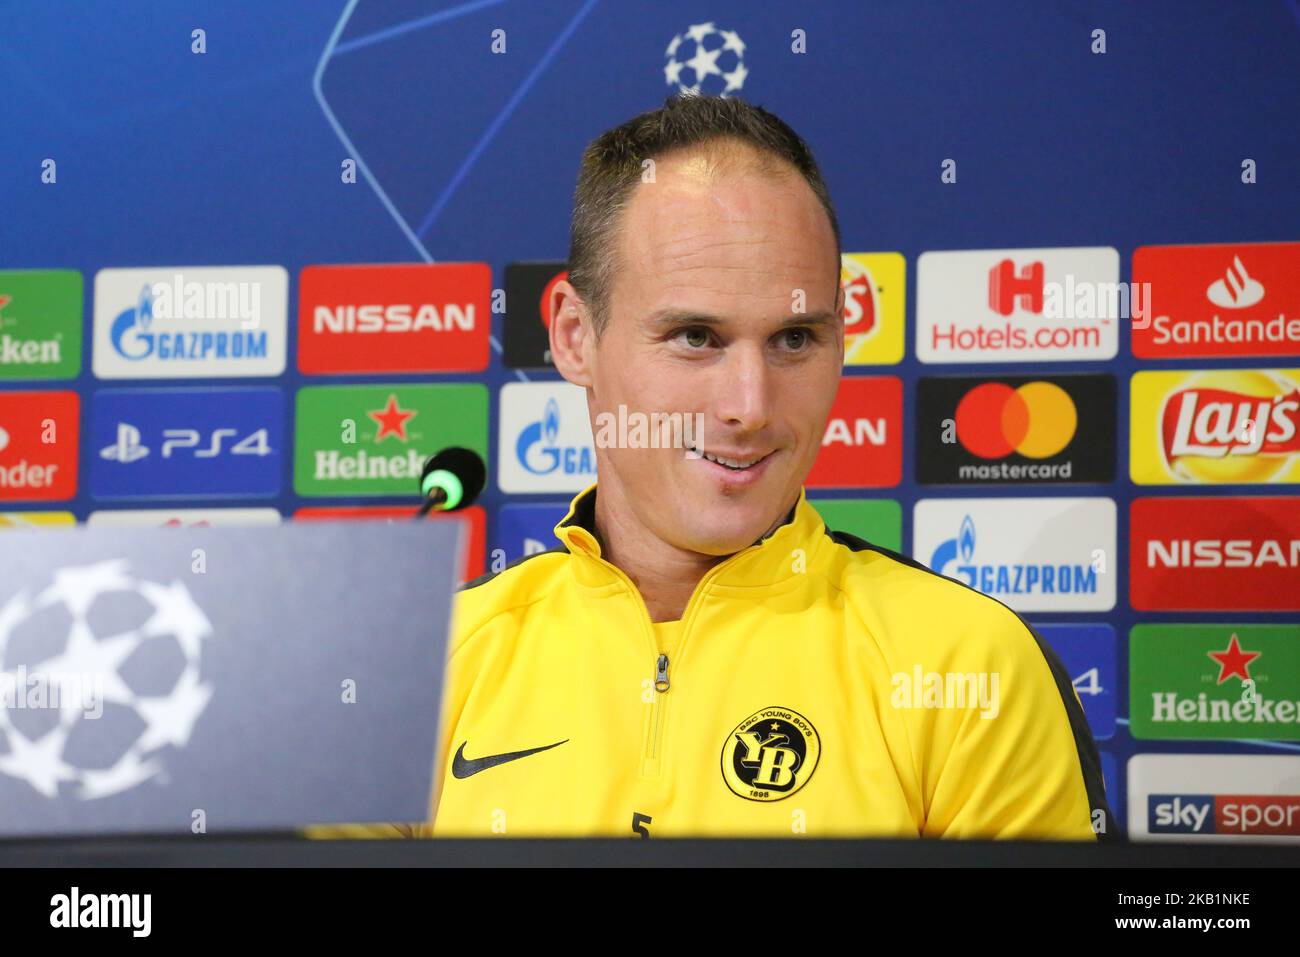 Steve von Bergen (Berner Sport Club Young Boys) during the press conference on the eve of the UEFA Champions League match between Juventus FC and Berner Sport Club Young Boys at Allianz Stadium on October 01l, 2018 in Turin, Italy. (Photo by Massimiliano Ferraro/NurPhoto) Stock Photo